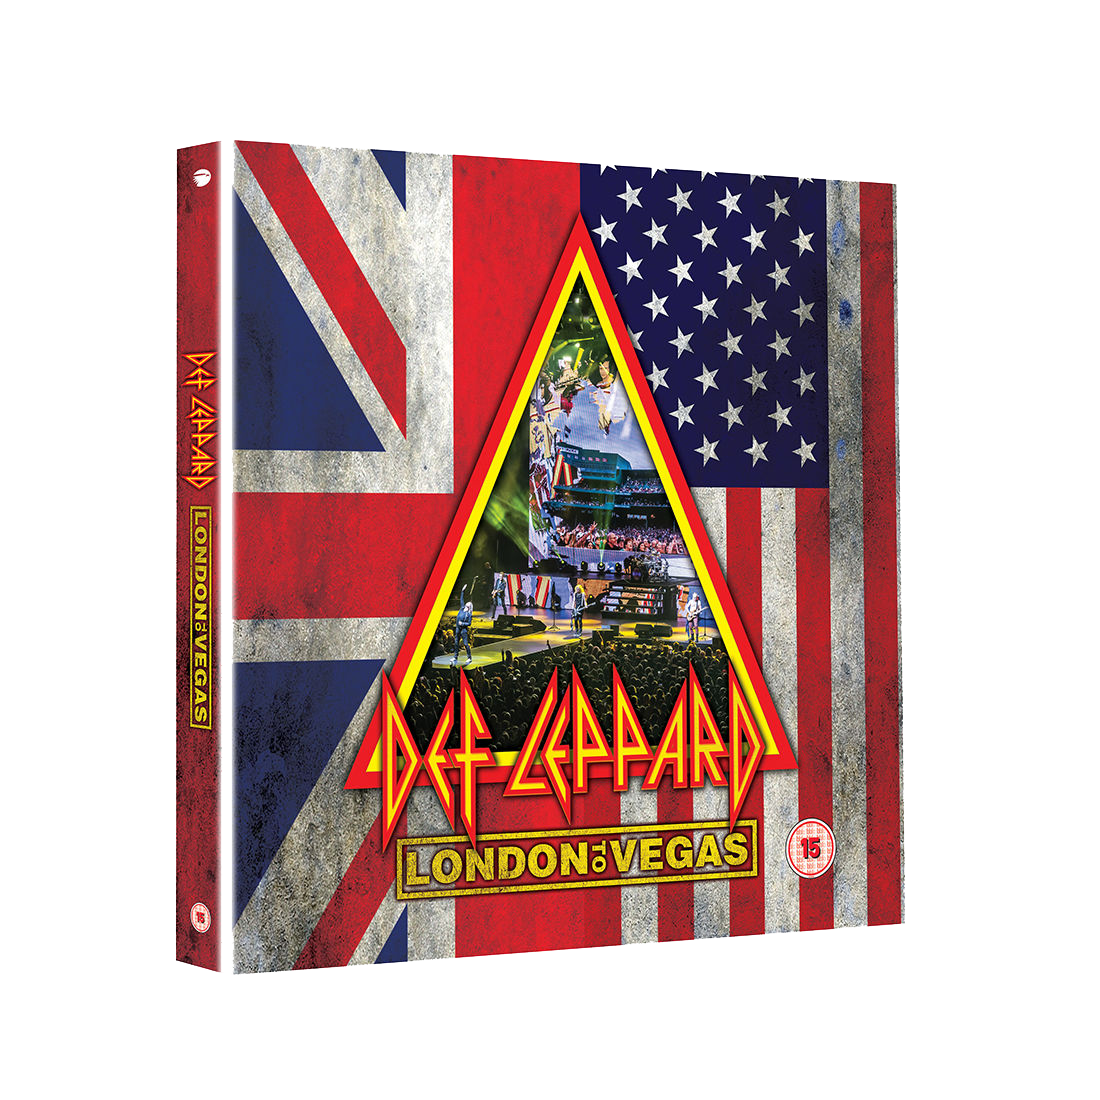 Def Leppard - London To Vegas: Deluxe 2DVD + 4CD Box Set